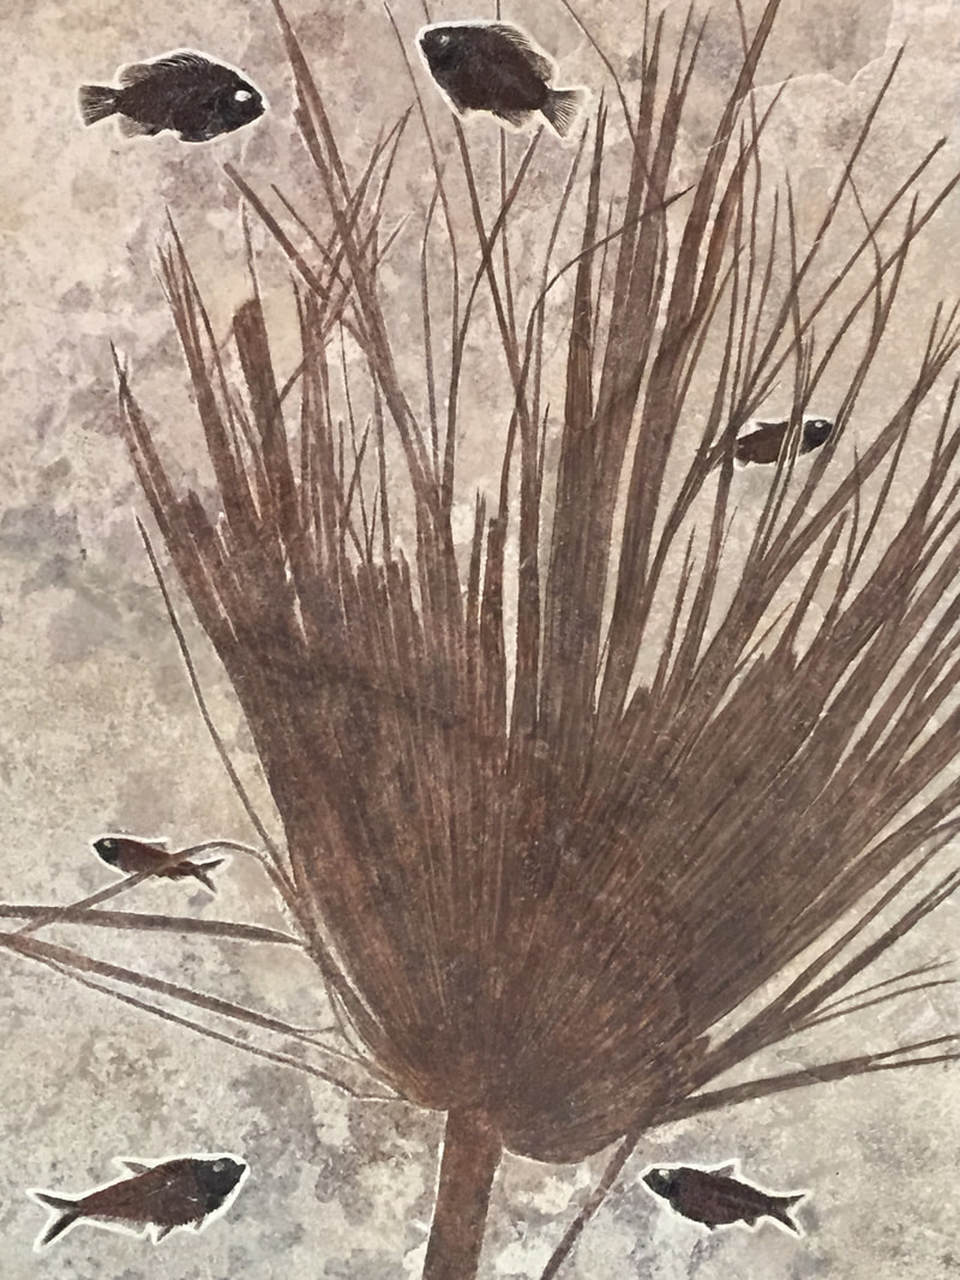 Fossil palm frond and fossil fish in 18